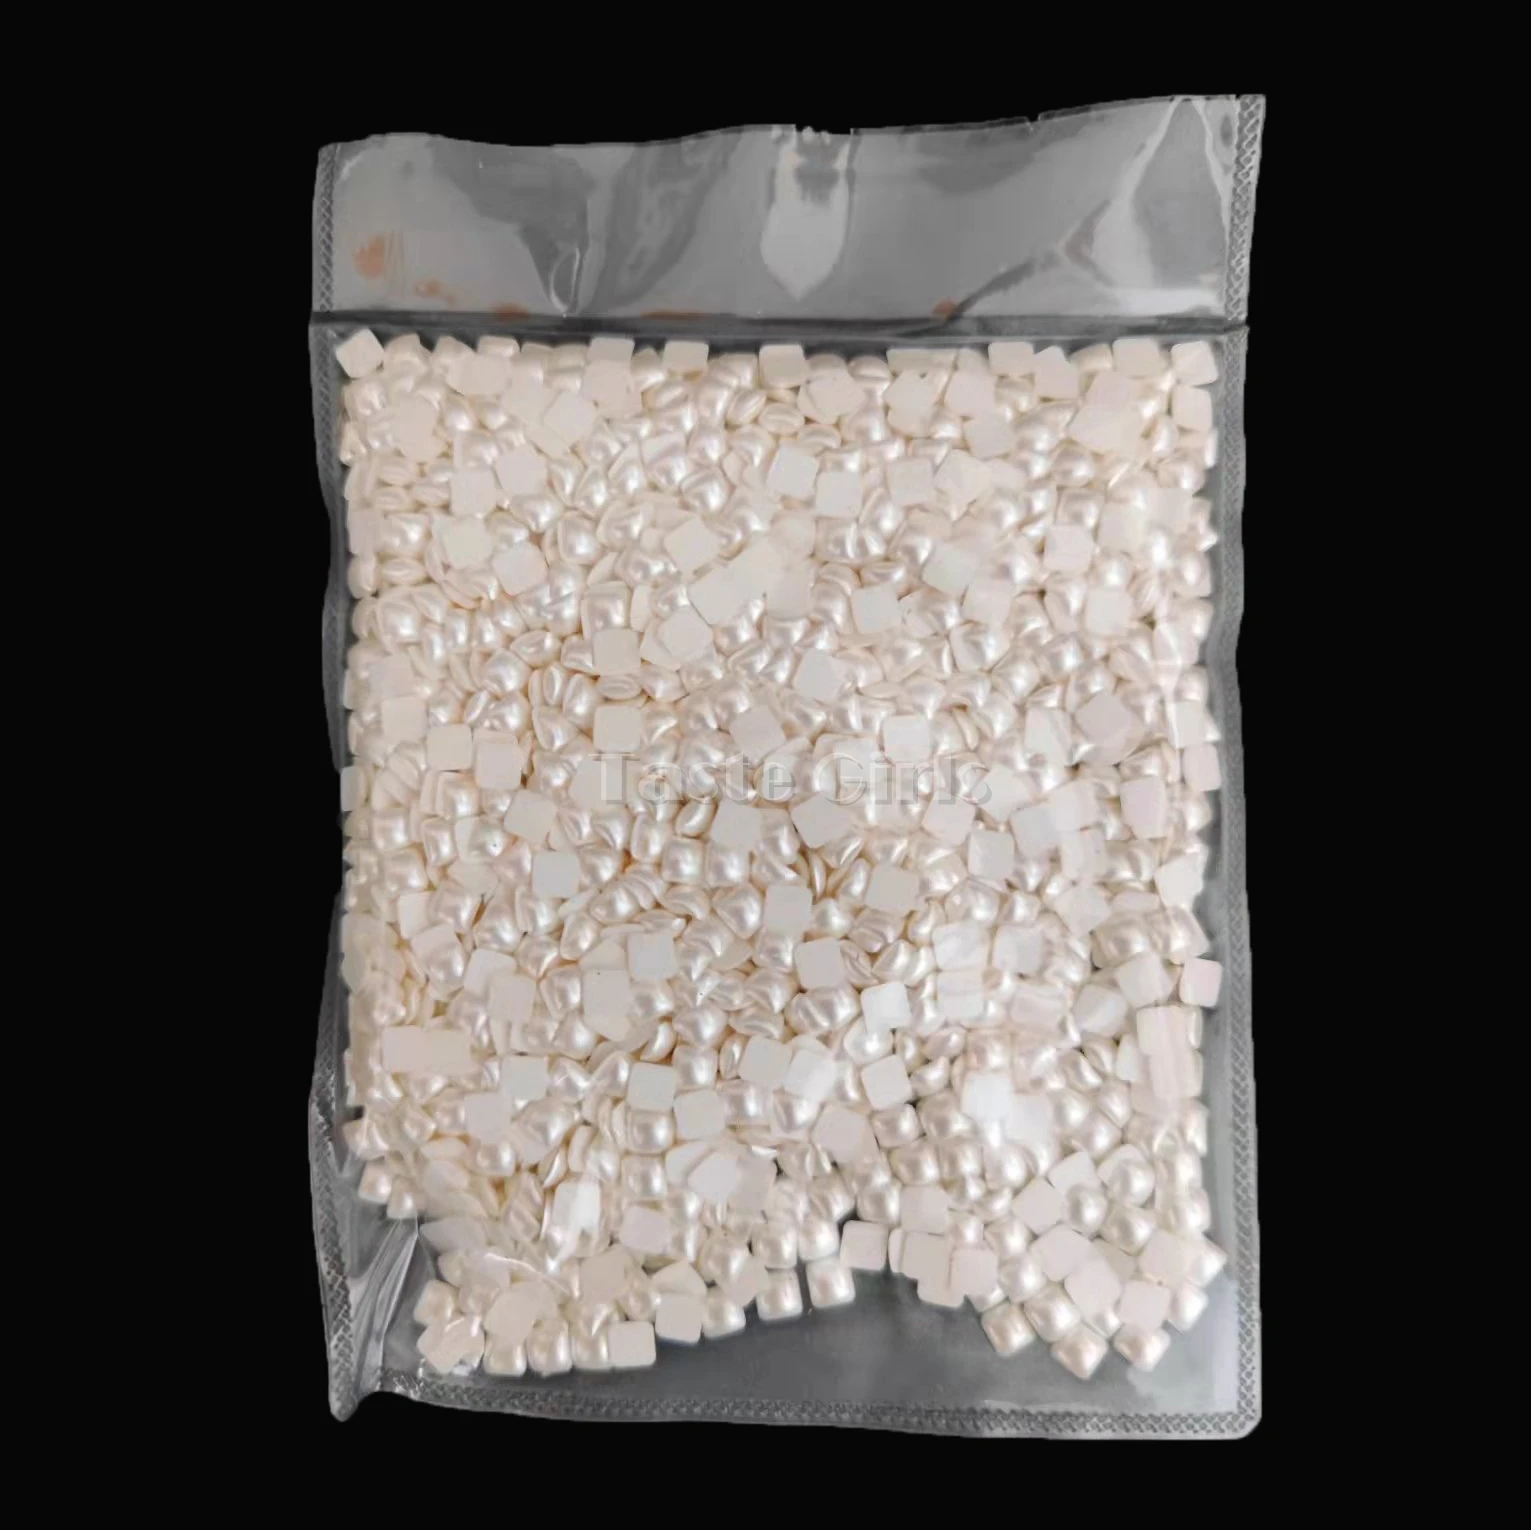 Wholesale 10000PCS White AB Square Pearls Flatback 5mm Nail Art Jewelry Rhinestones Decorations Manicure Accessories Charms